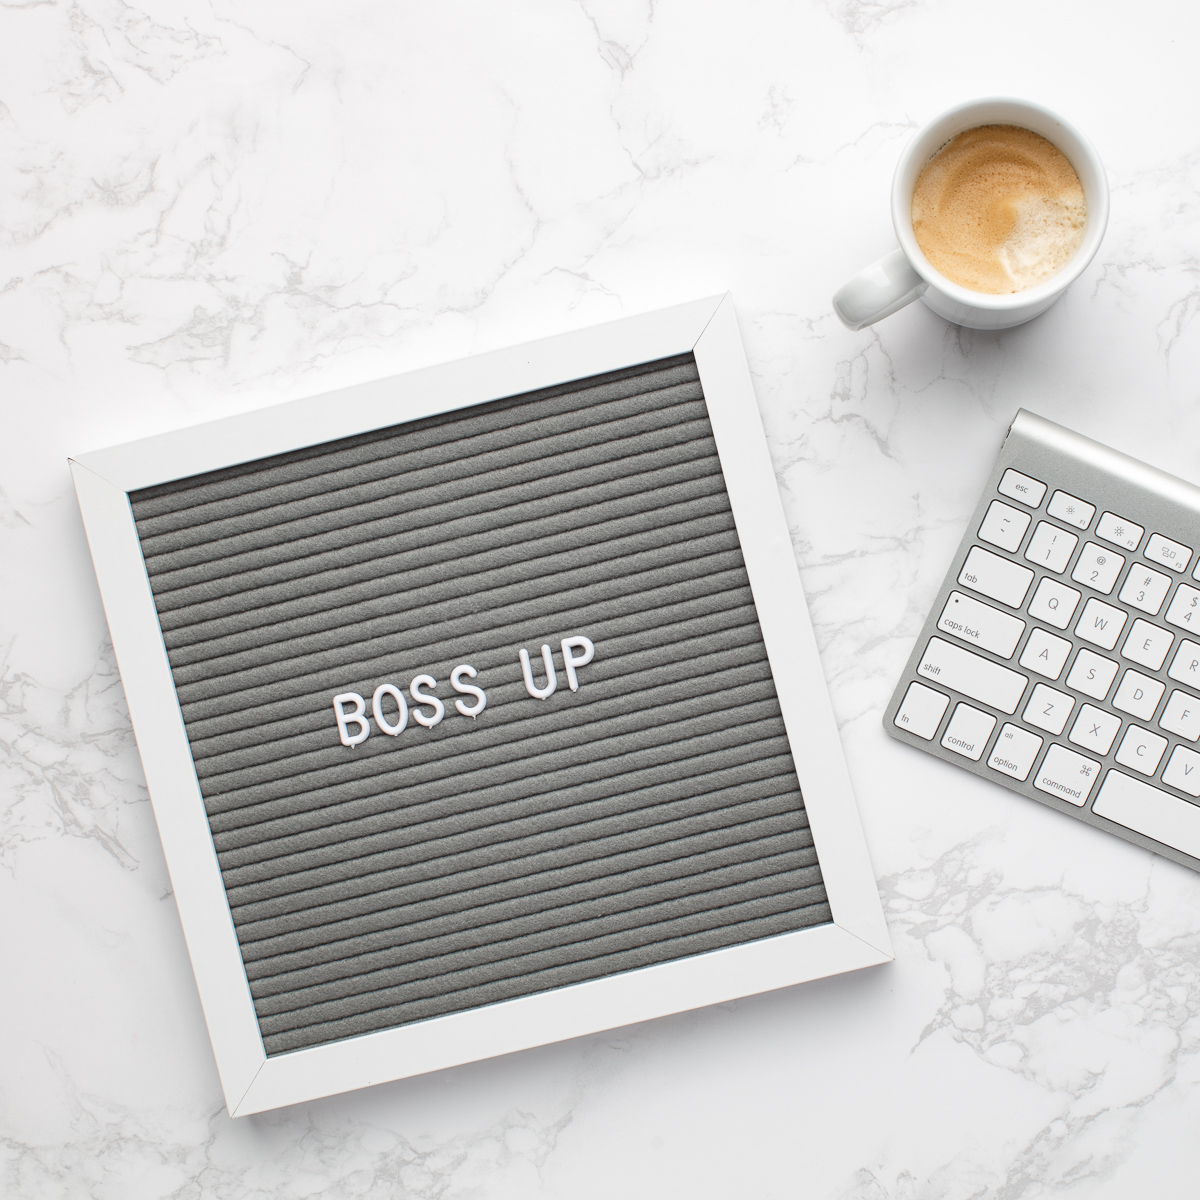 Boss Up with Email Campaigns